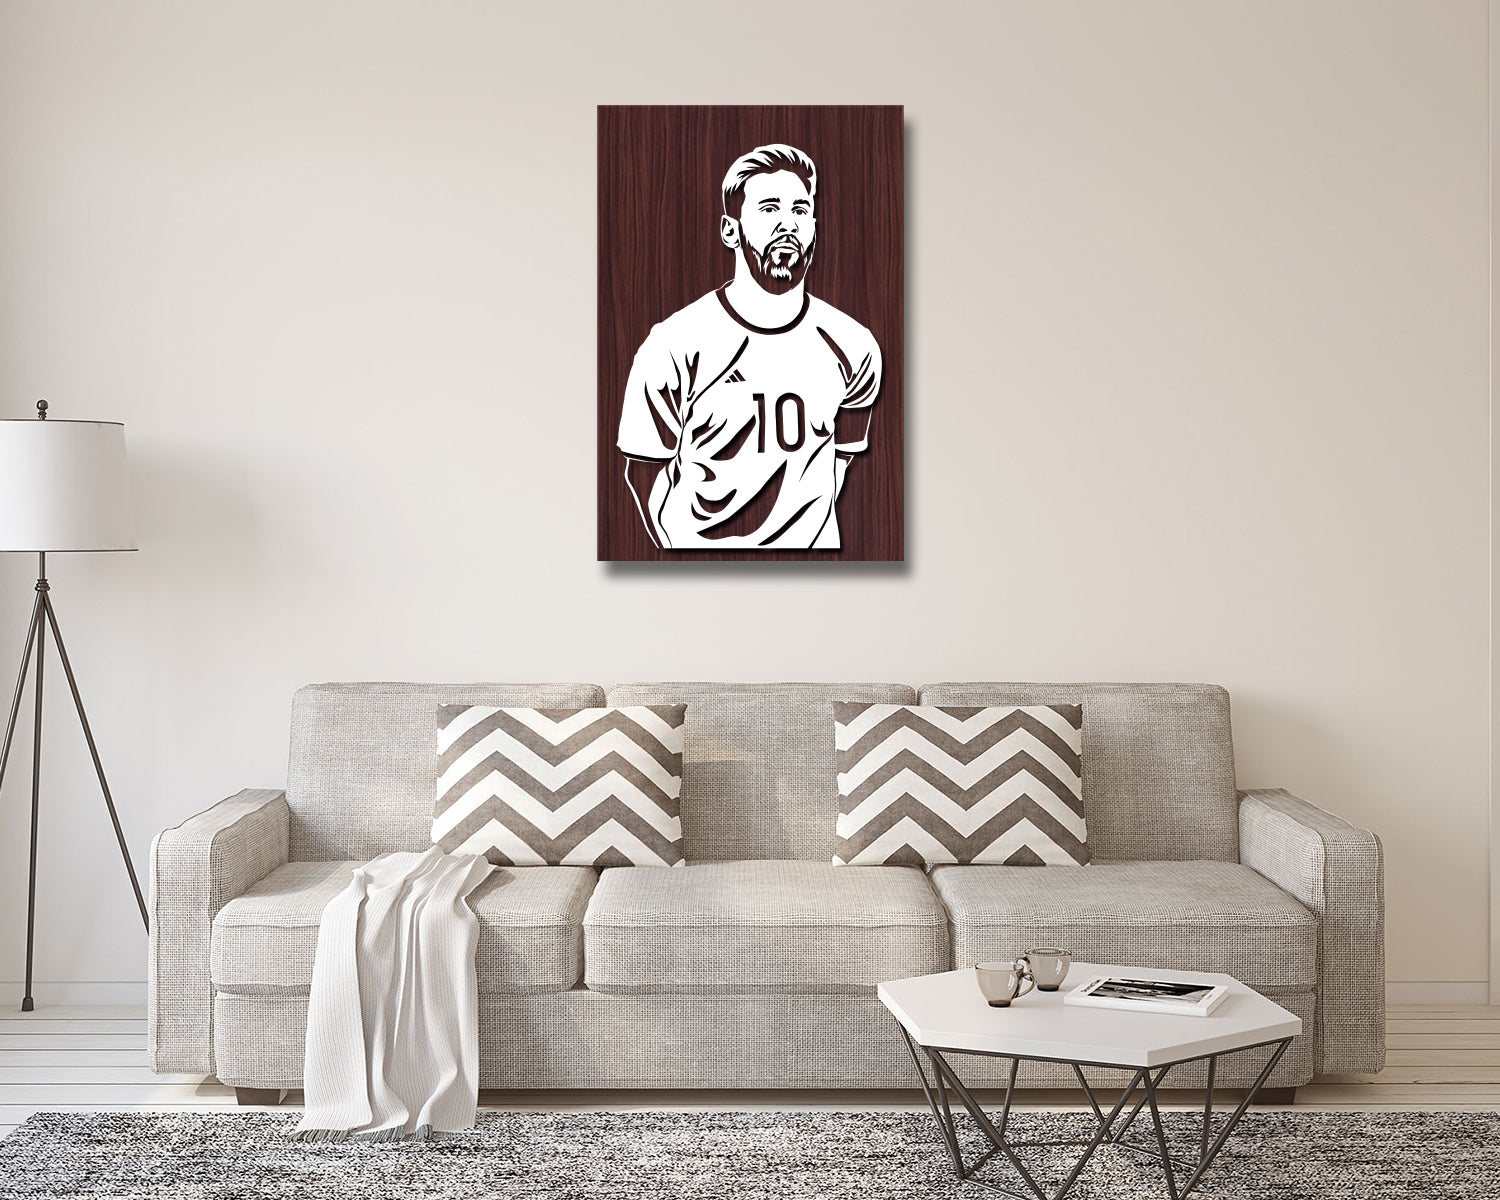 Lionel Messi LED Wooden Decal 